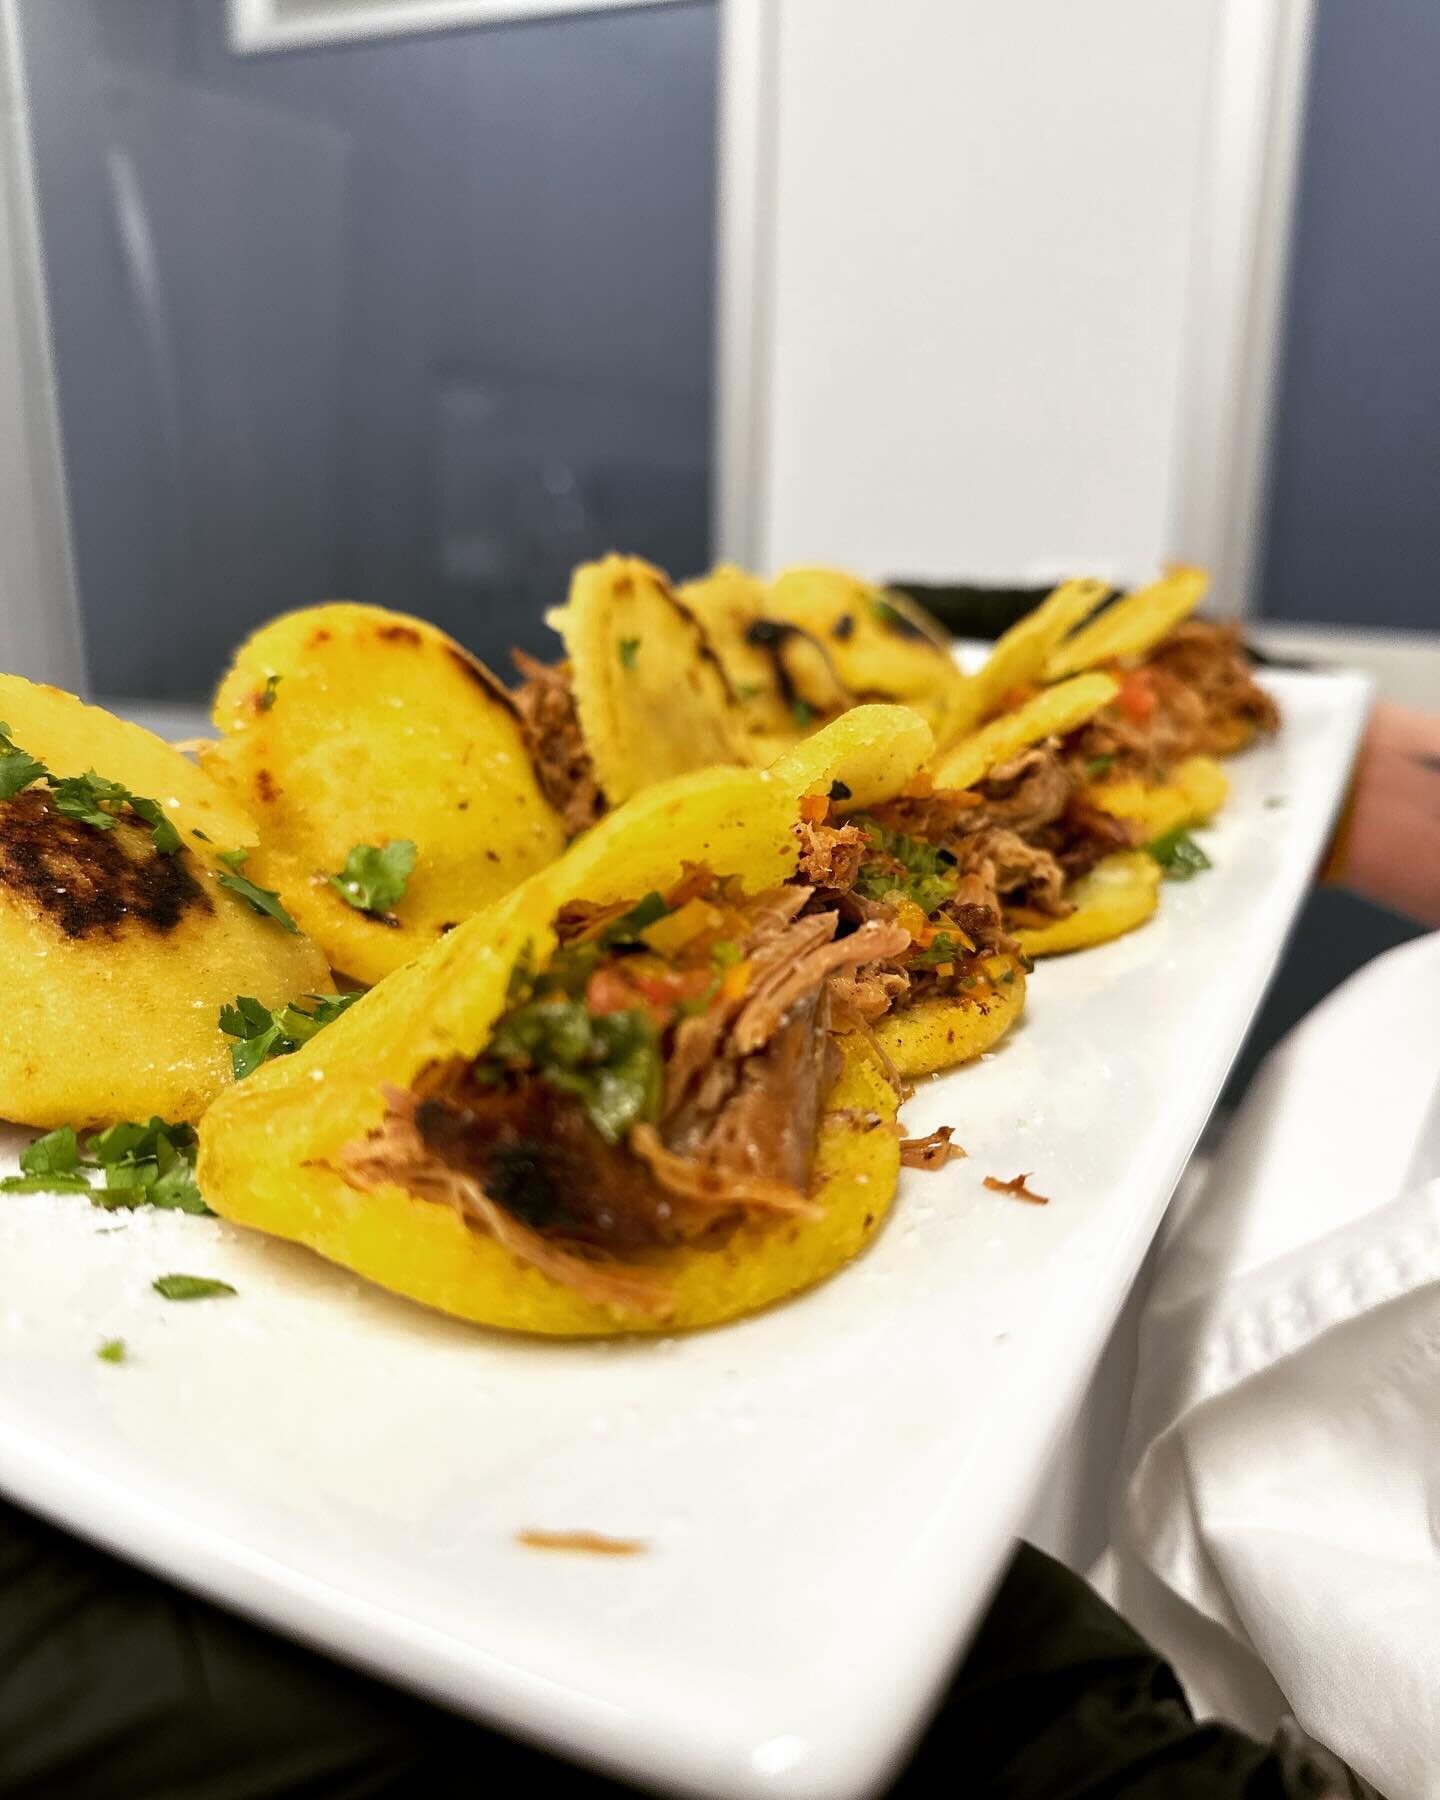 Stuffed Arepas with pulled pork and Aj&iacute;, cilantro and&hellip;.OMG Juli&rsquo;s face says it all!!! Haha 😂 ❤️ 😜 #catering #noco #privatechef #co #foco #arepas #colombianfusion